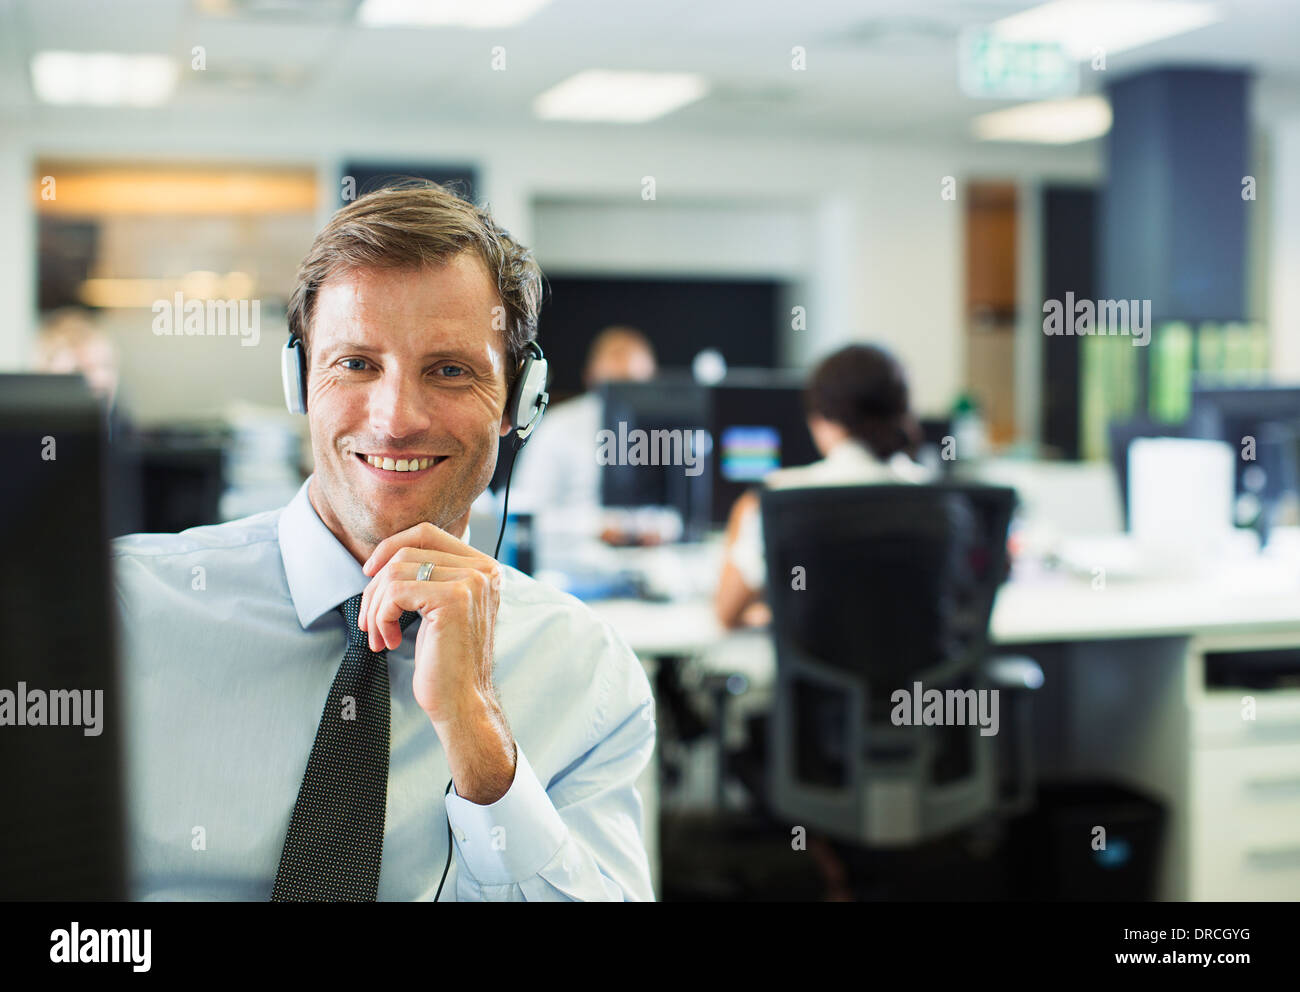 Businessman wearing headset in office Banque D'Images